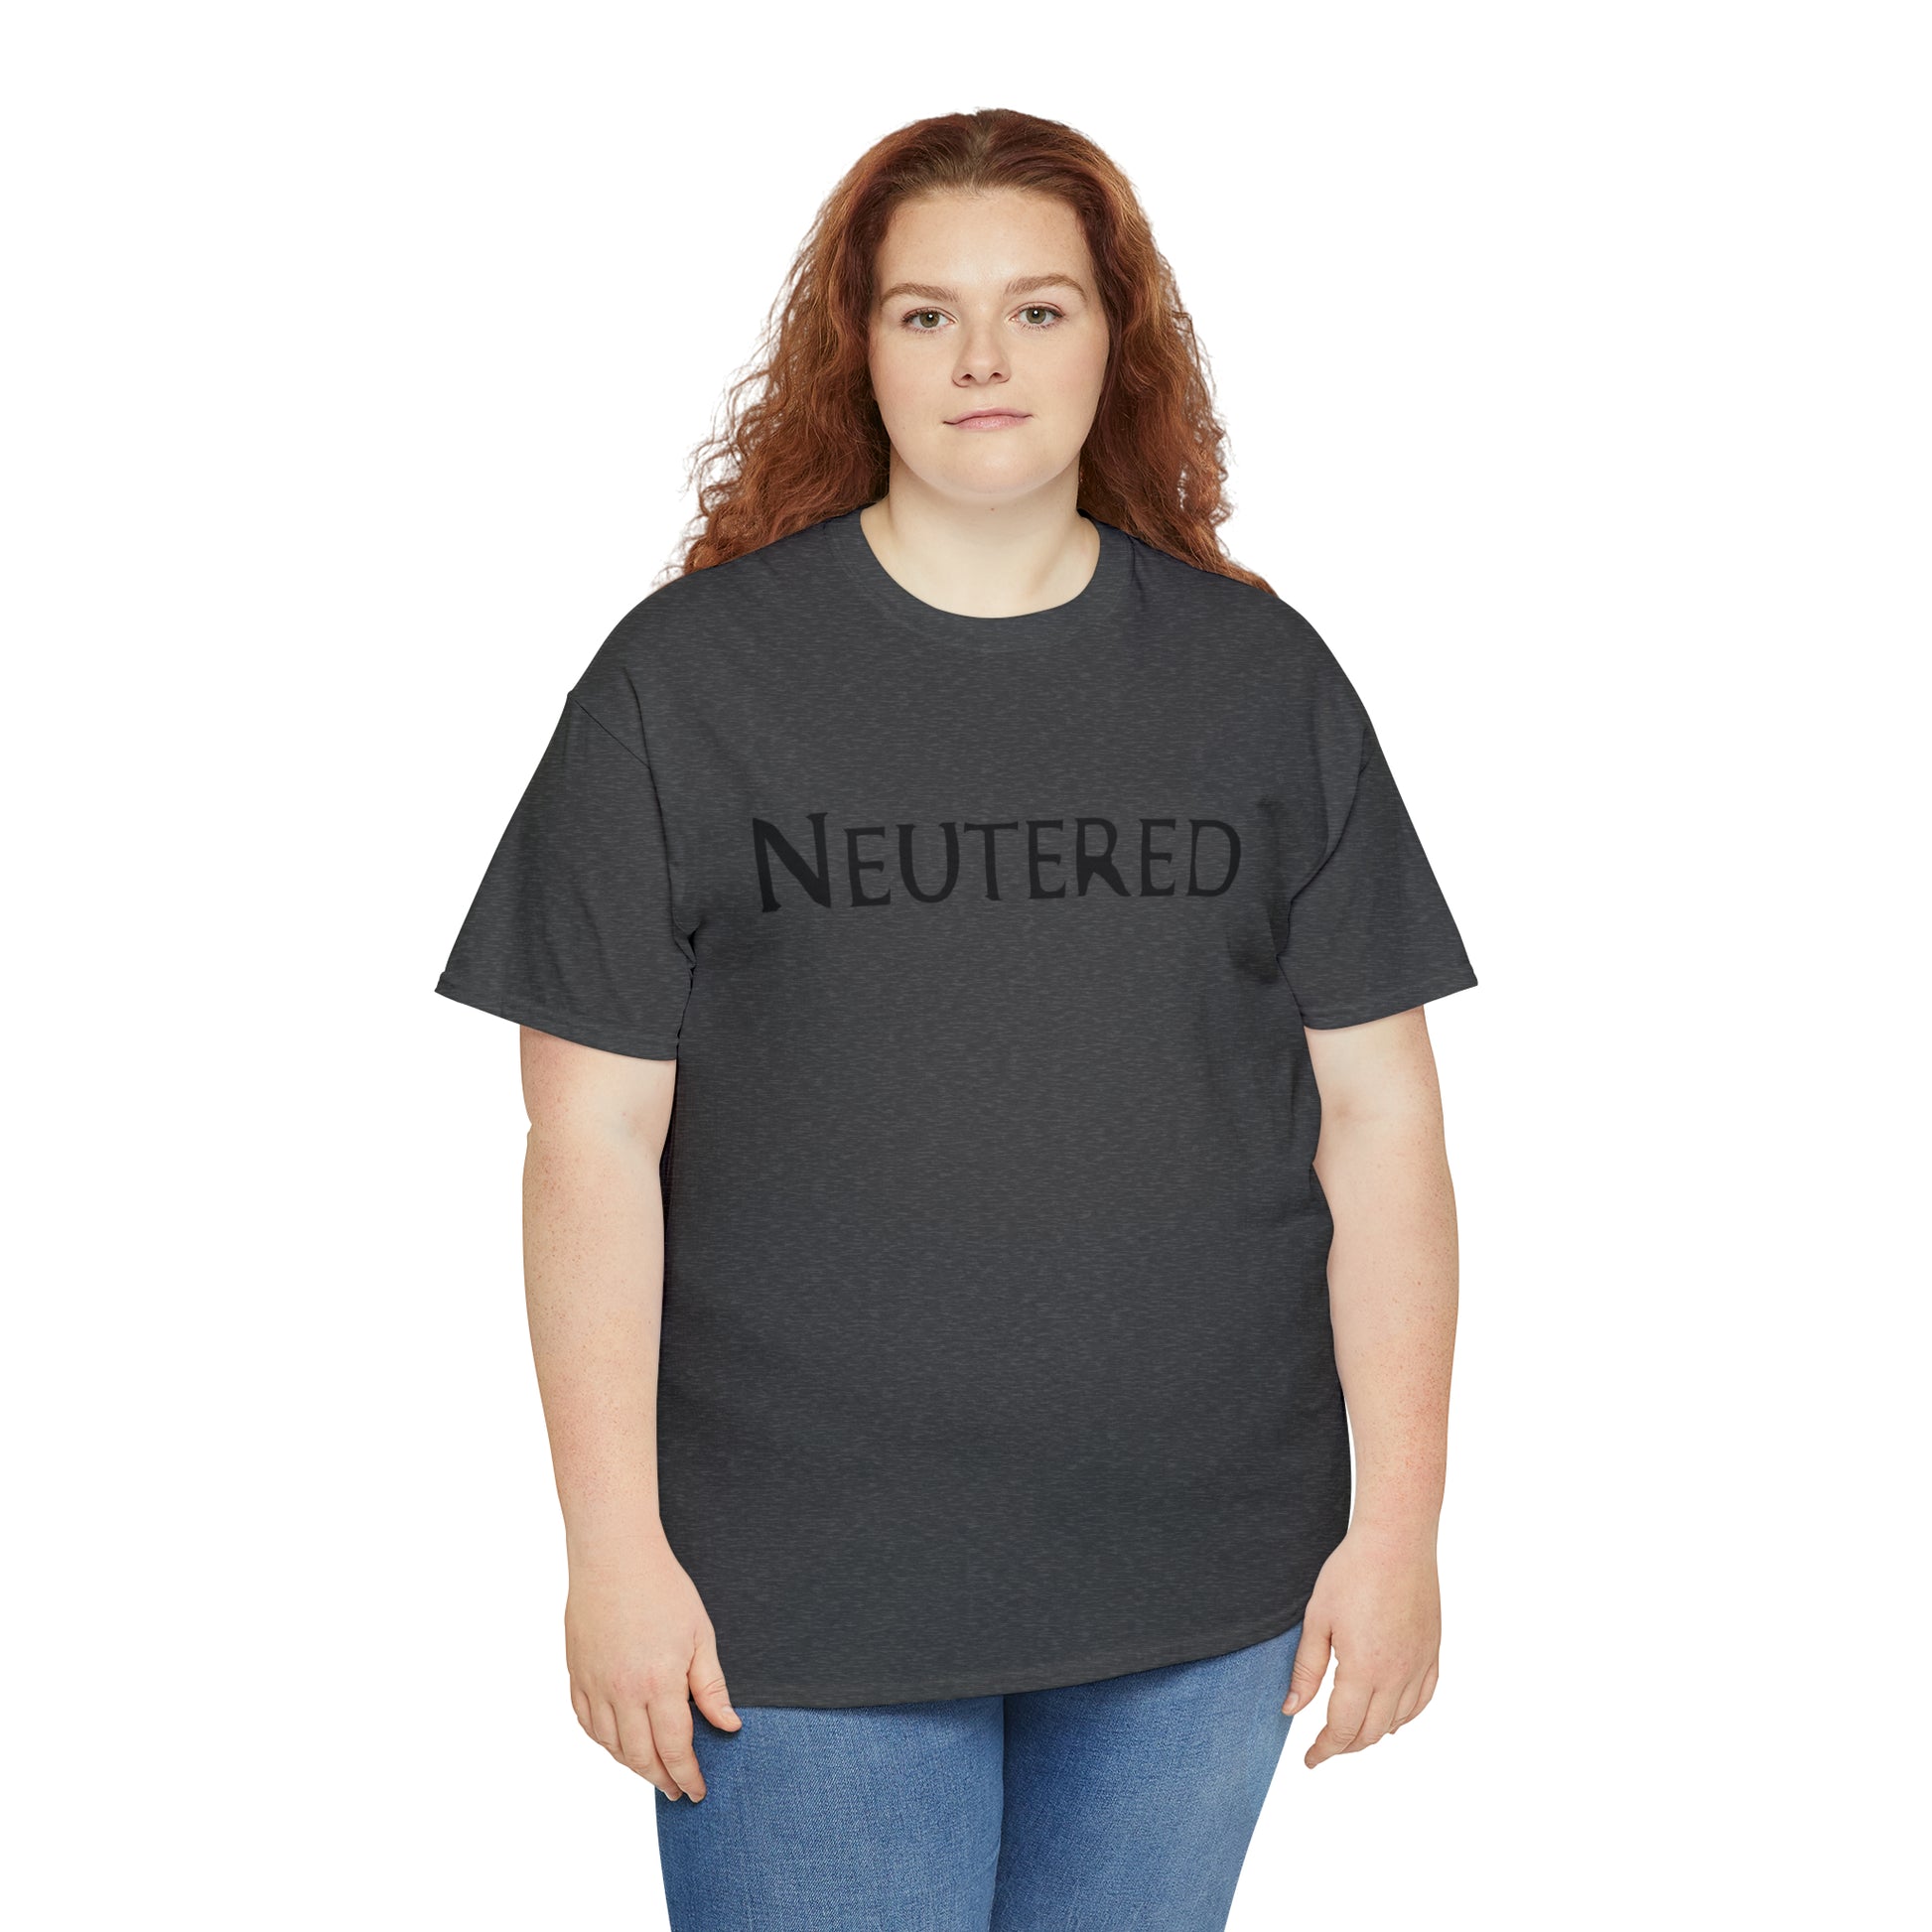 "Neutered" T-Shirt - Weave Got Gifts - Unique Gifts You Won’t Find Anywhere Else!